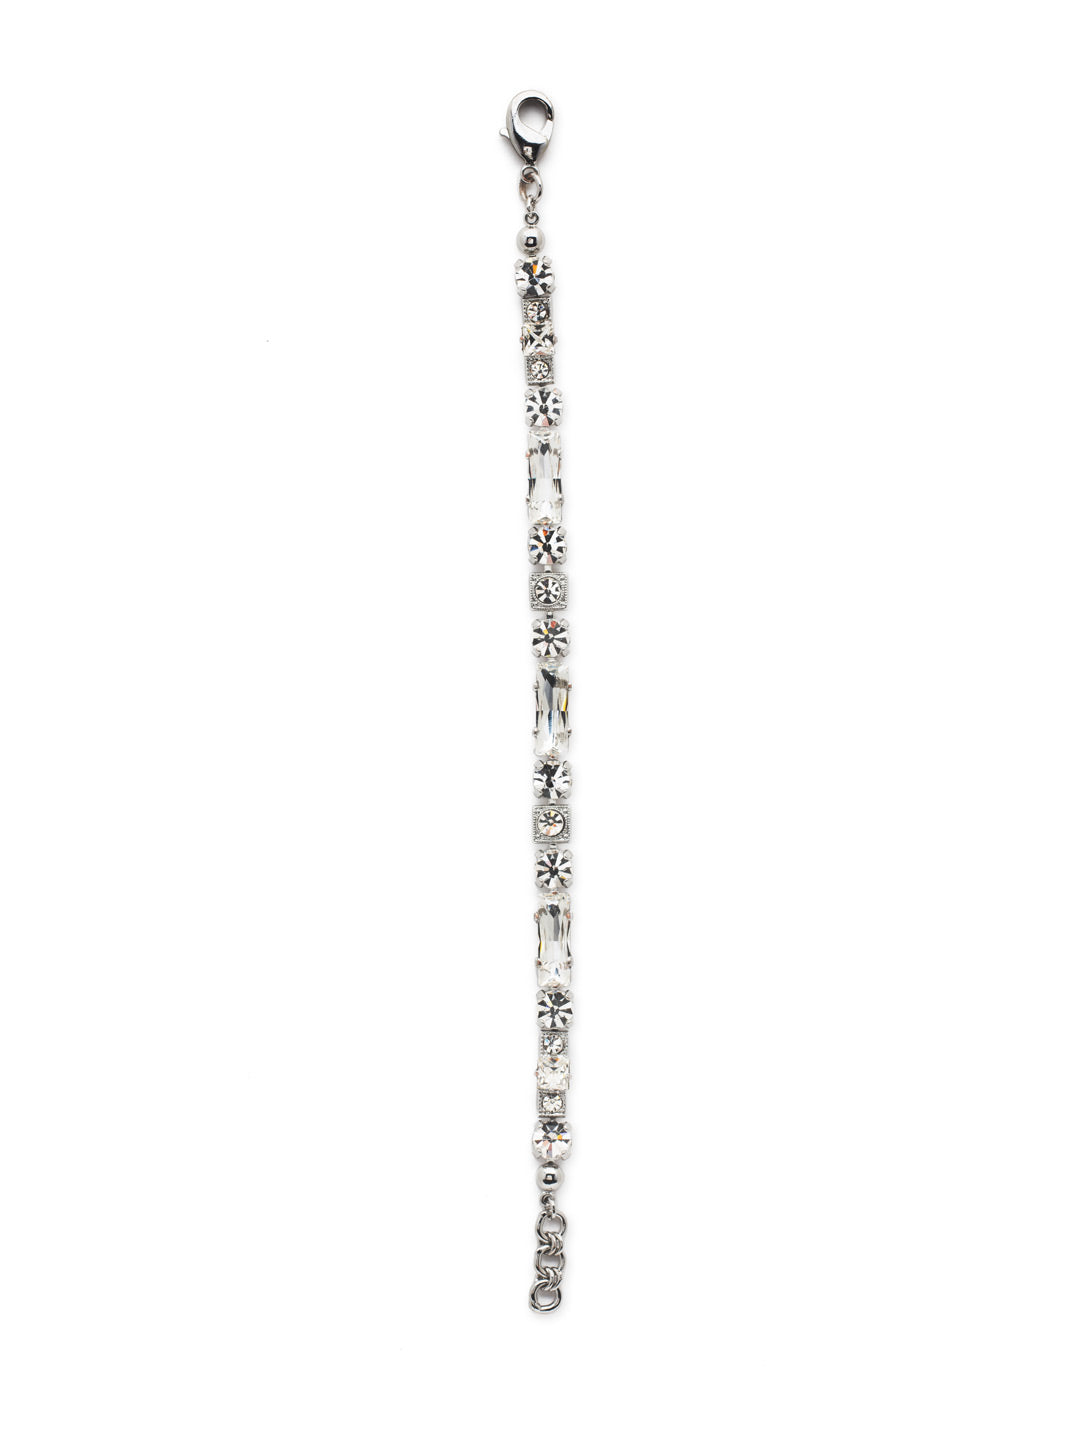 Modern Baguette Tennis Bracelet - BCD66PDCRY - <p>This clear-cut classic bracelet with its geometric design is sure to bring a touch of modern style to your life. From Sorrelli's Crystal collection in our Palladium finish.</p>